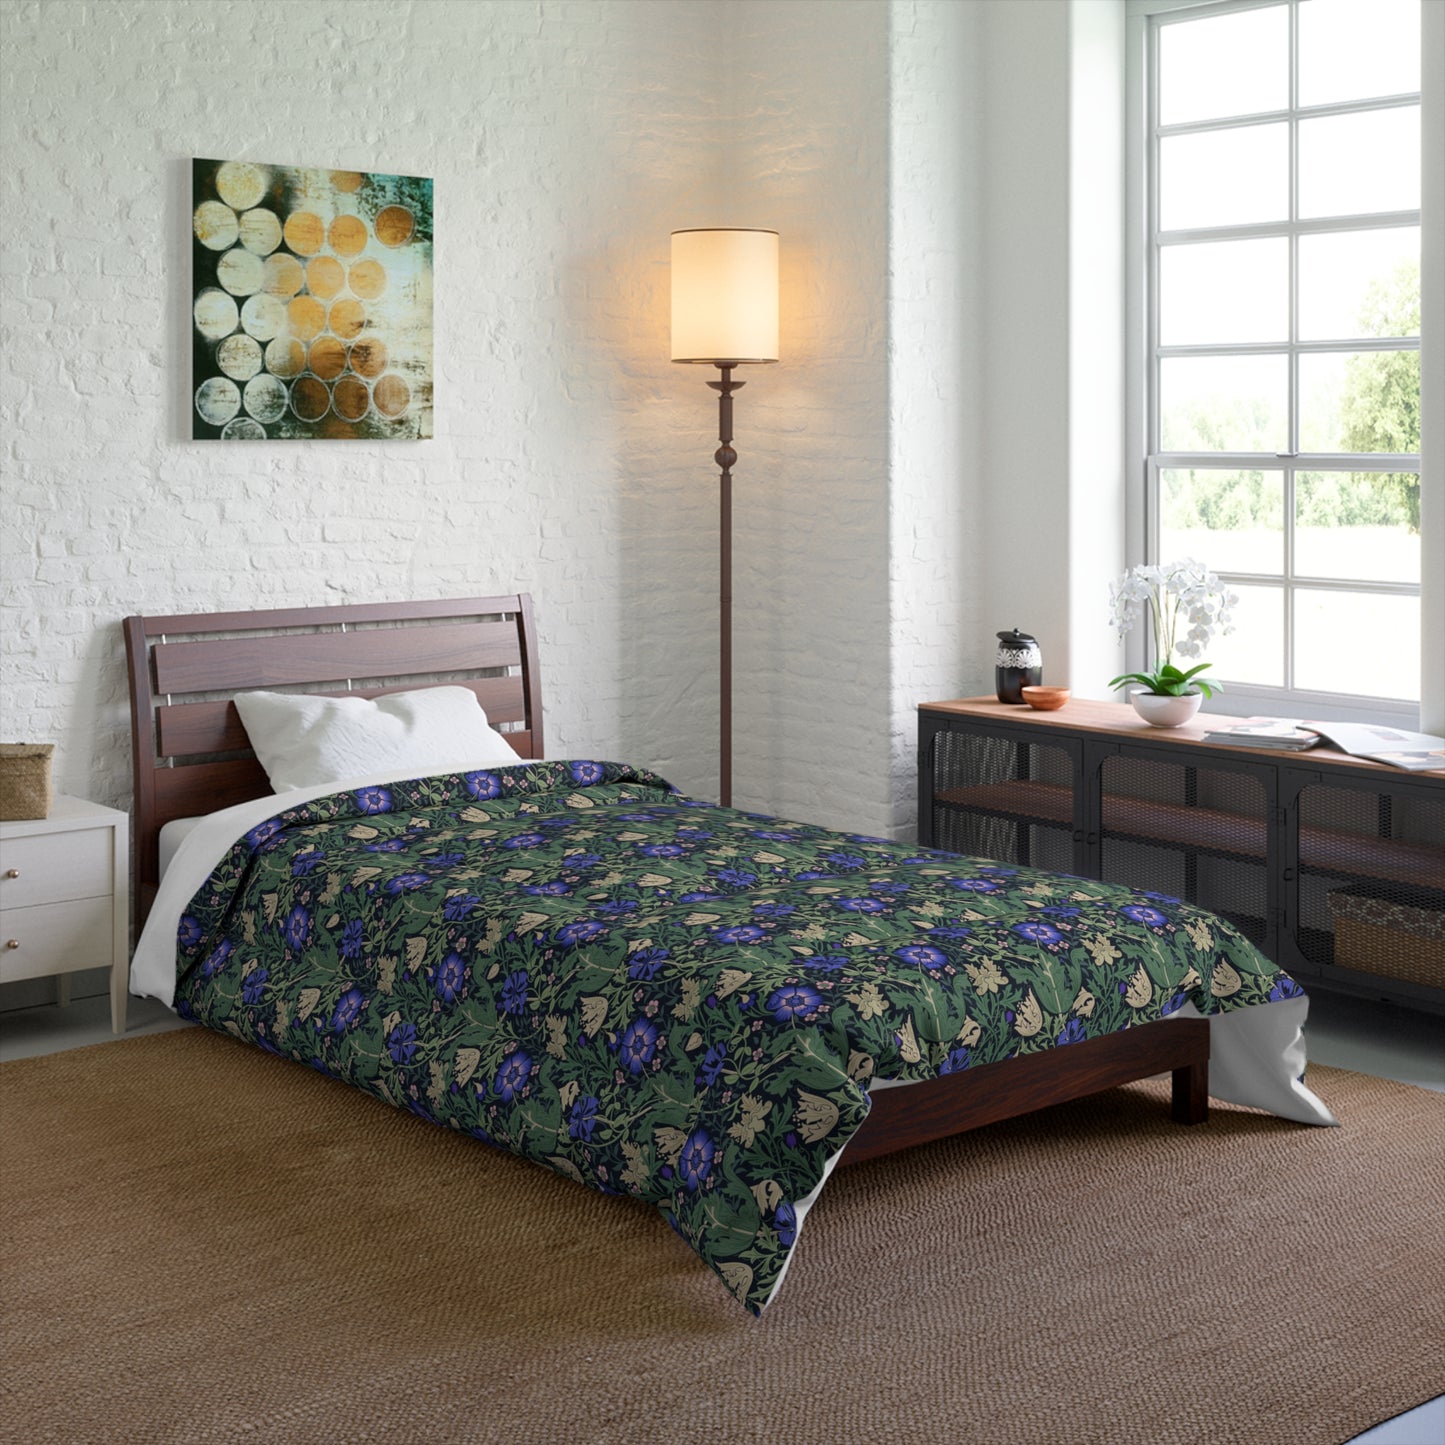 William Morris & Co Comforter - Compton Collection (Bluebell Cottage)